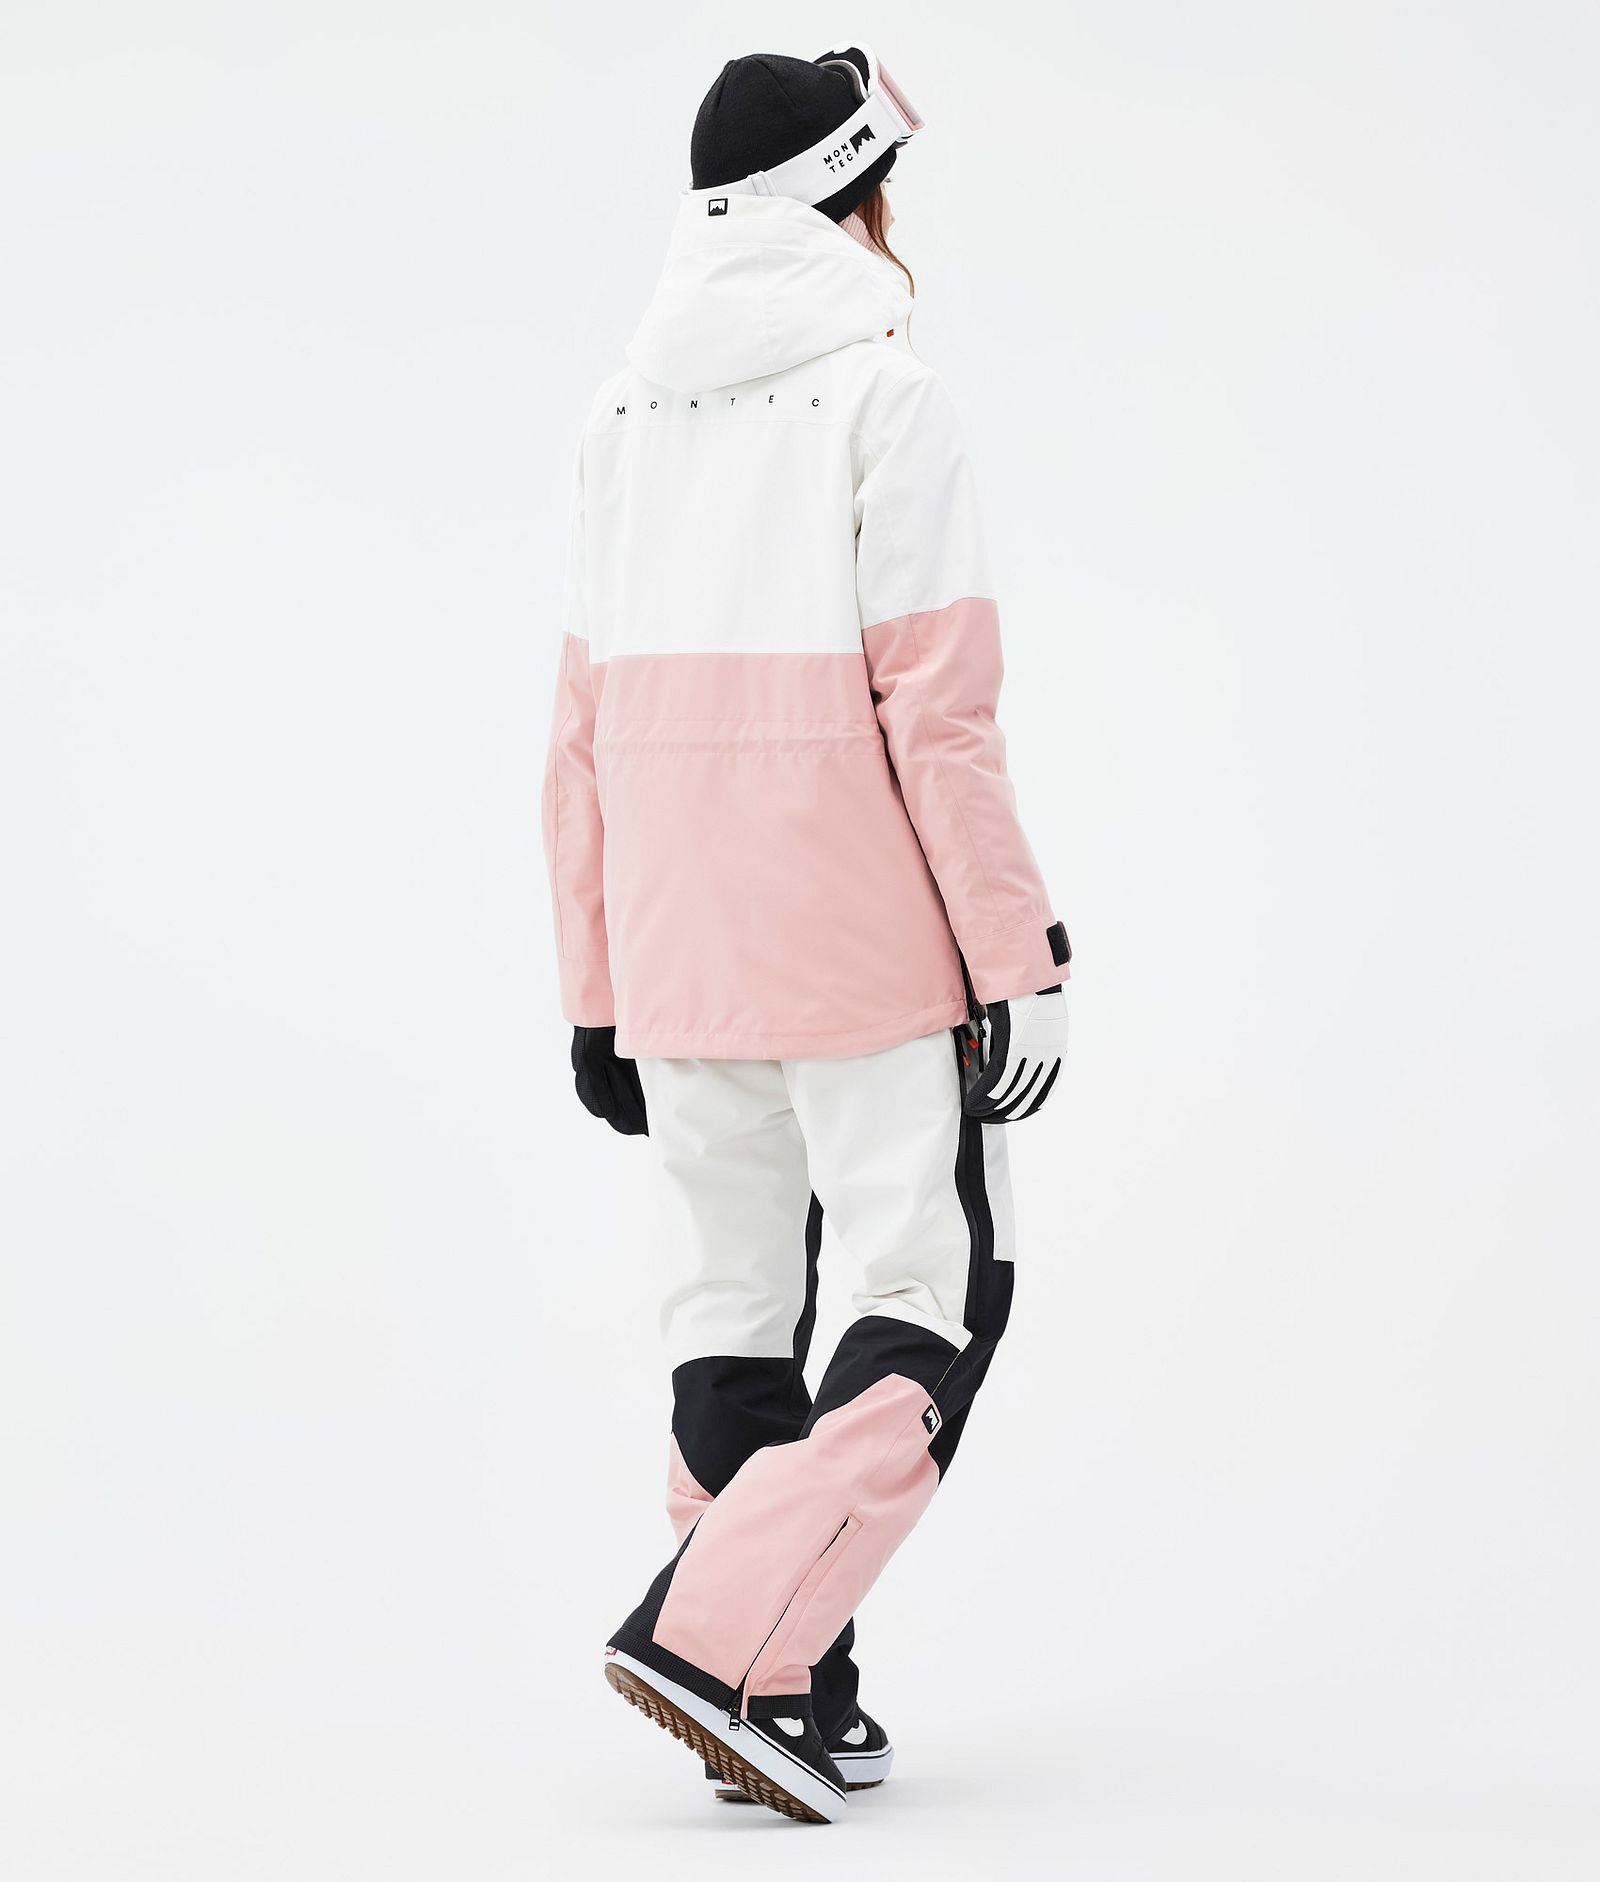 Montec Dune W Outfit Snowboard Femme Old White/Black/Soft Pink